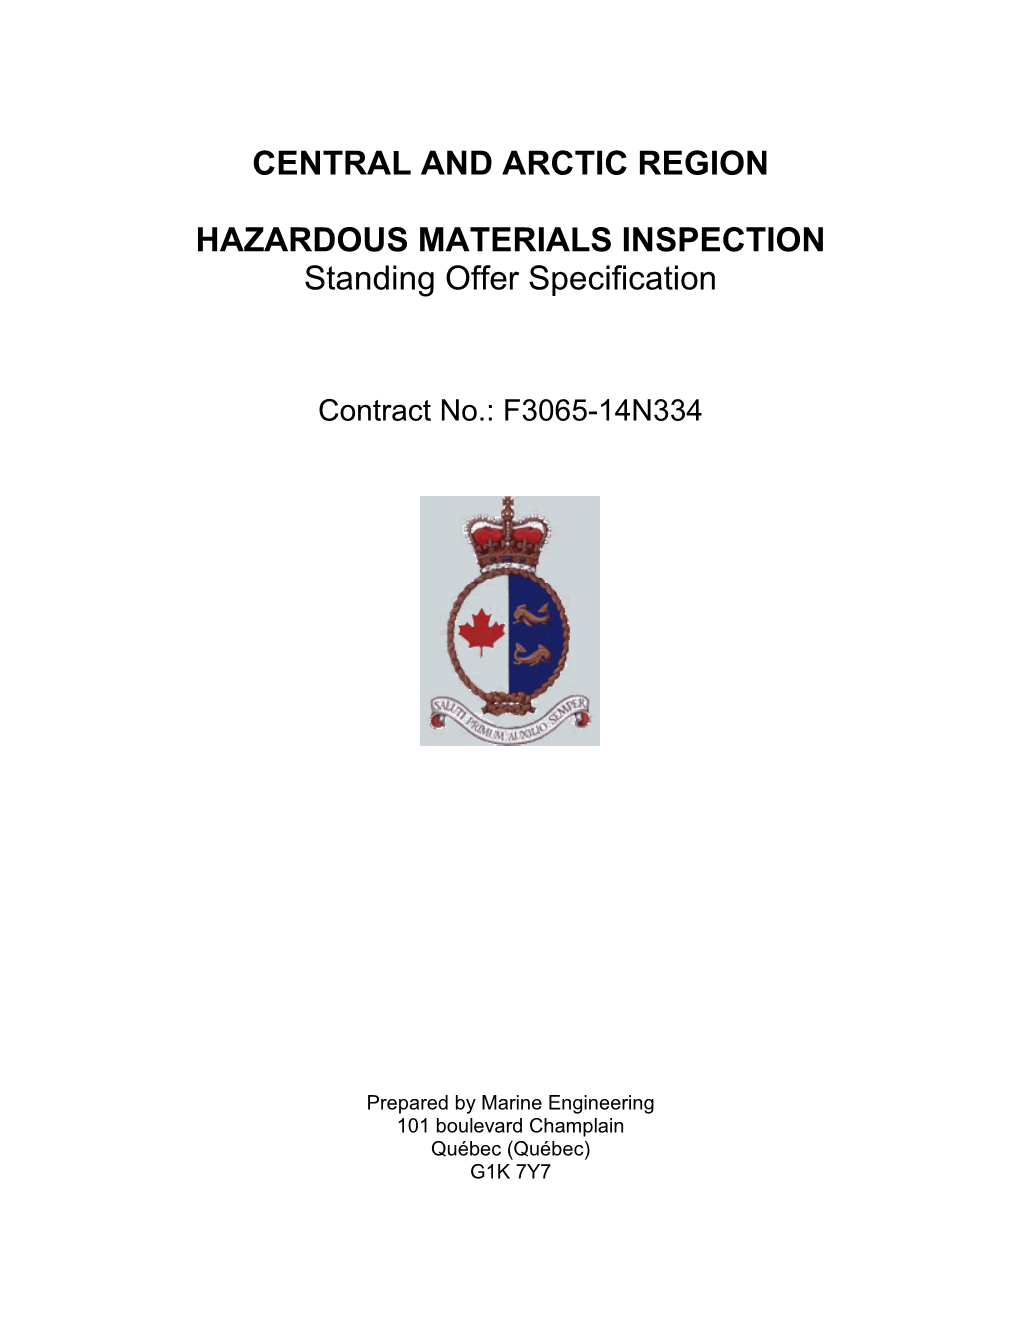 CENTRAL and ARCTIC REGION HAZARDOUS MATERIALS INSPECTION Standing Offer Specification